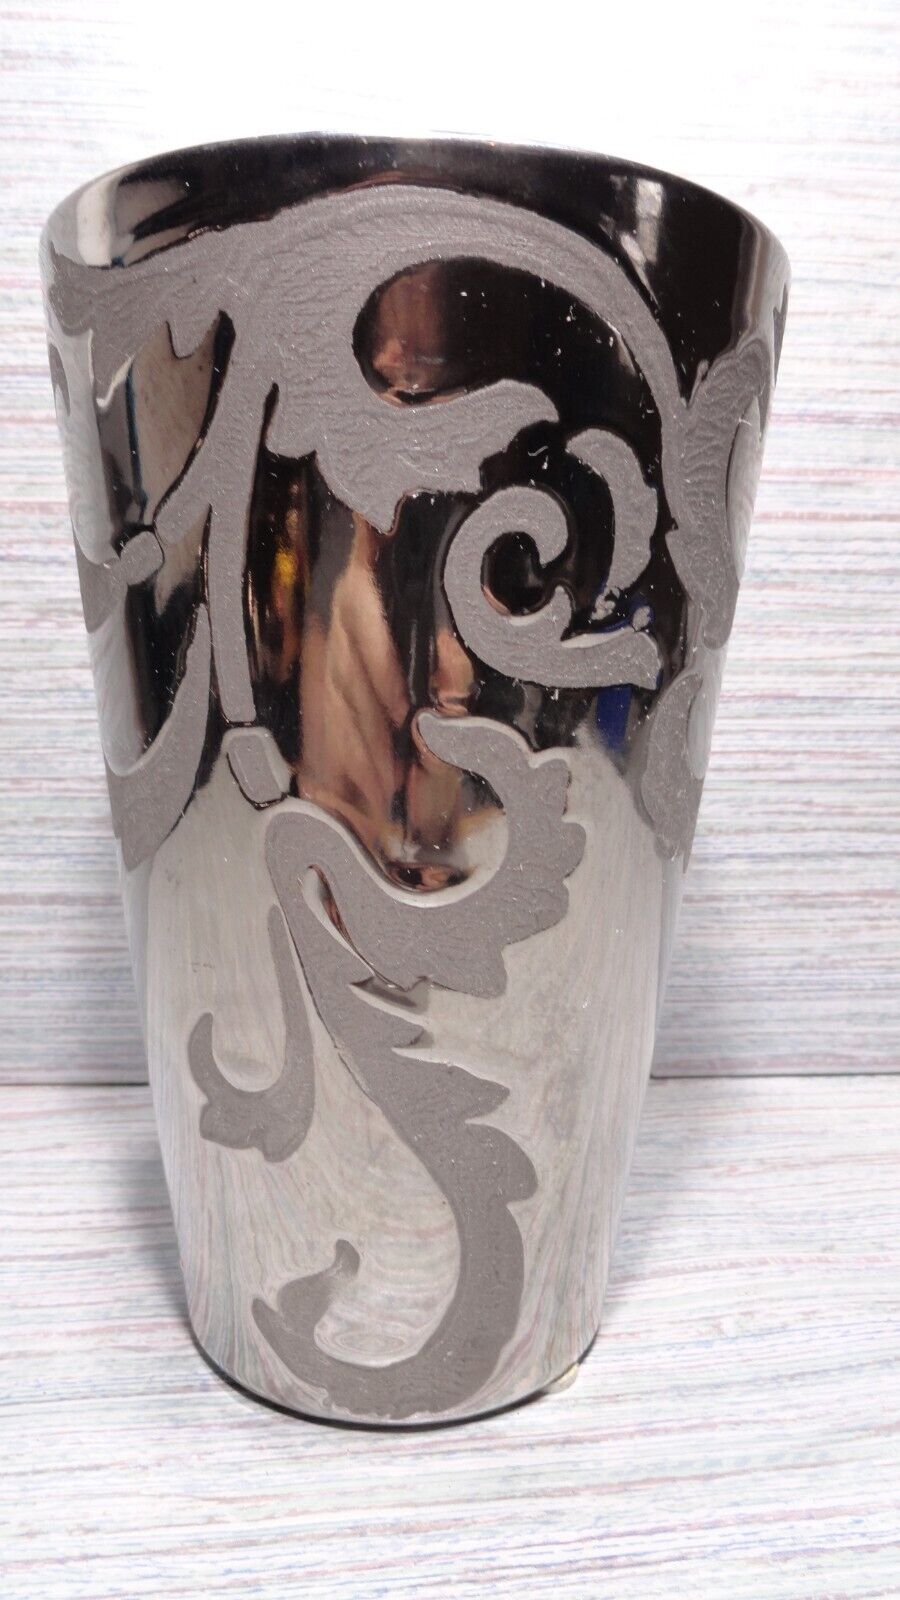 UCI Handcrafted Silver Ceramic Pottery Metallic Vase decorative accents ,flower